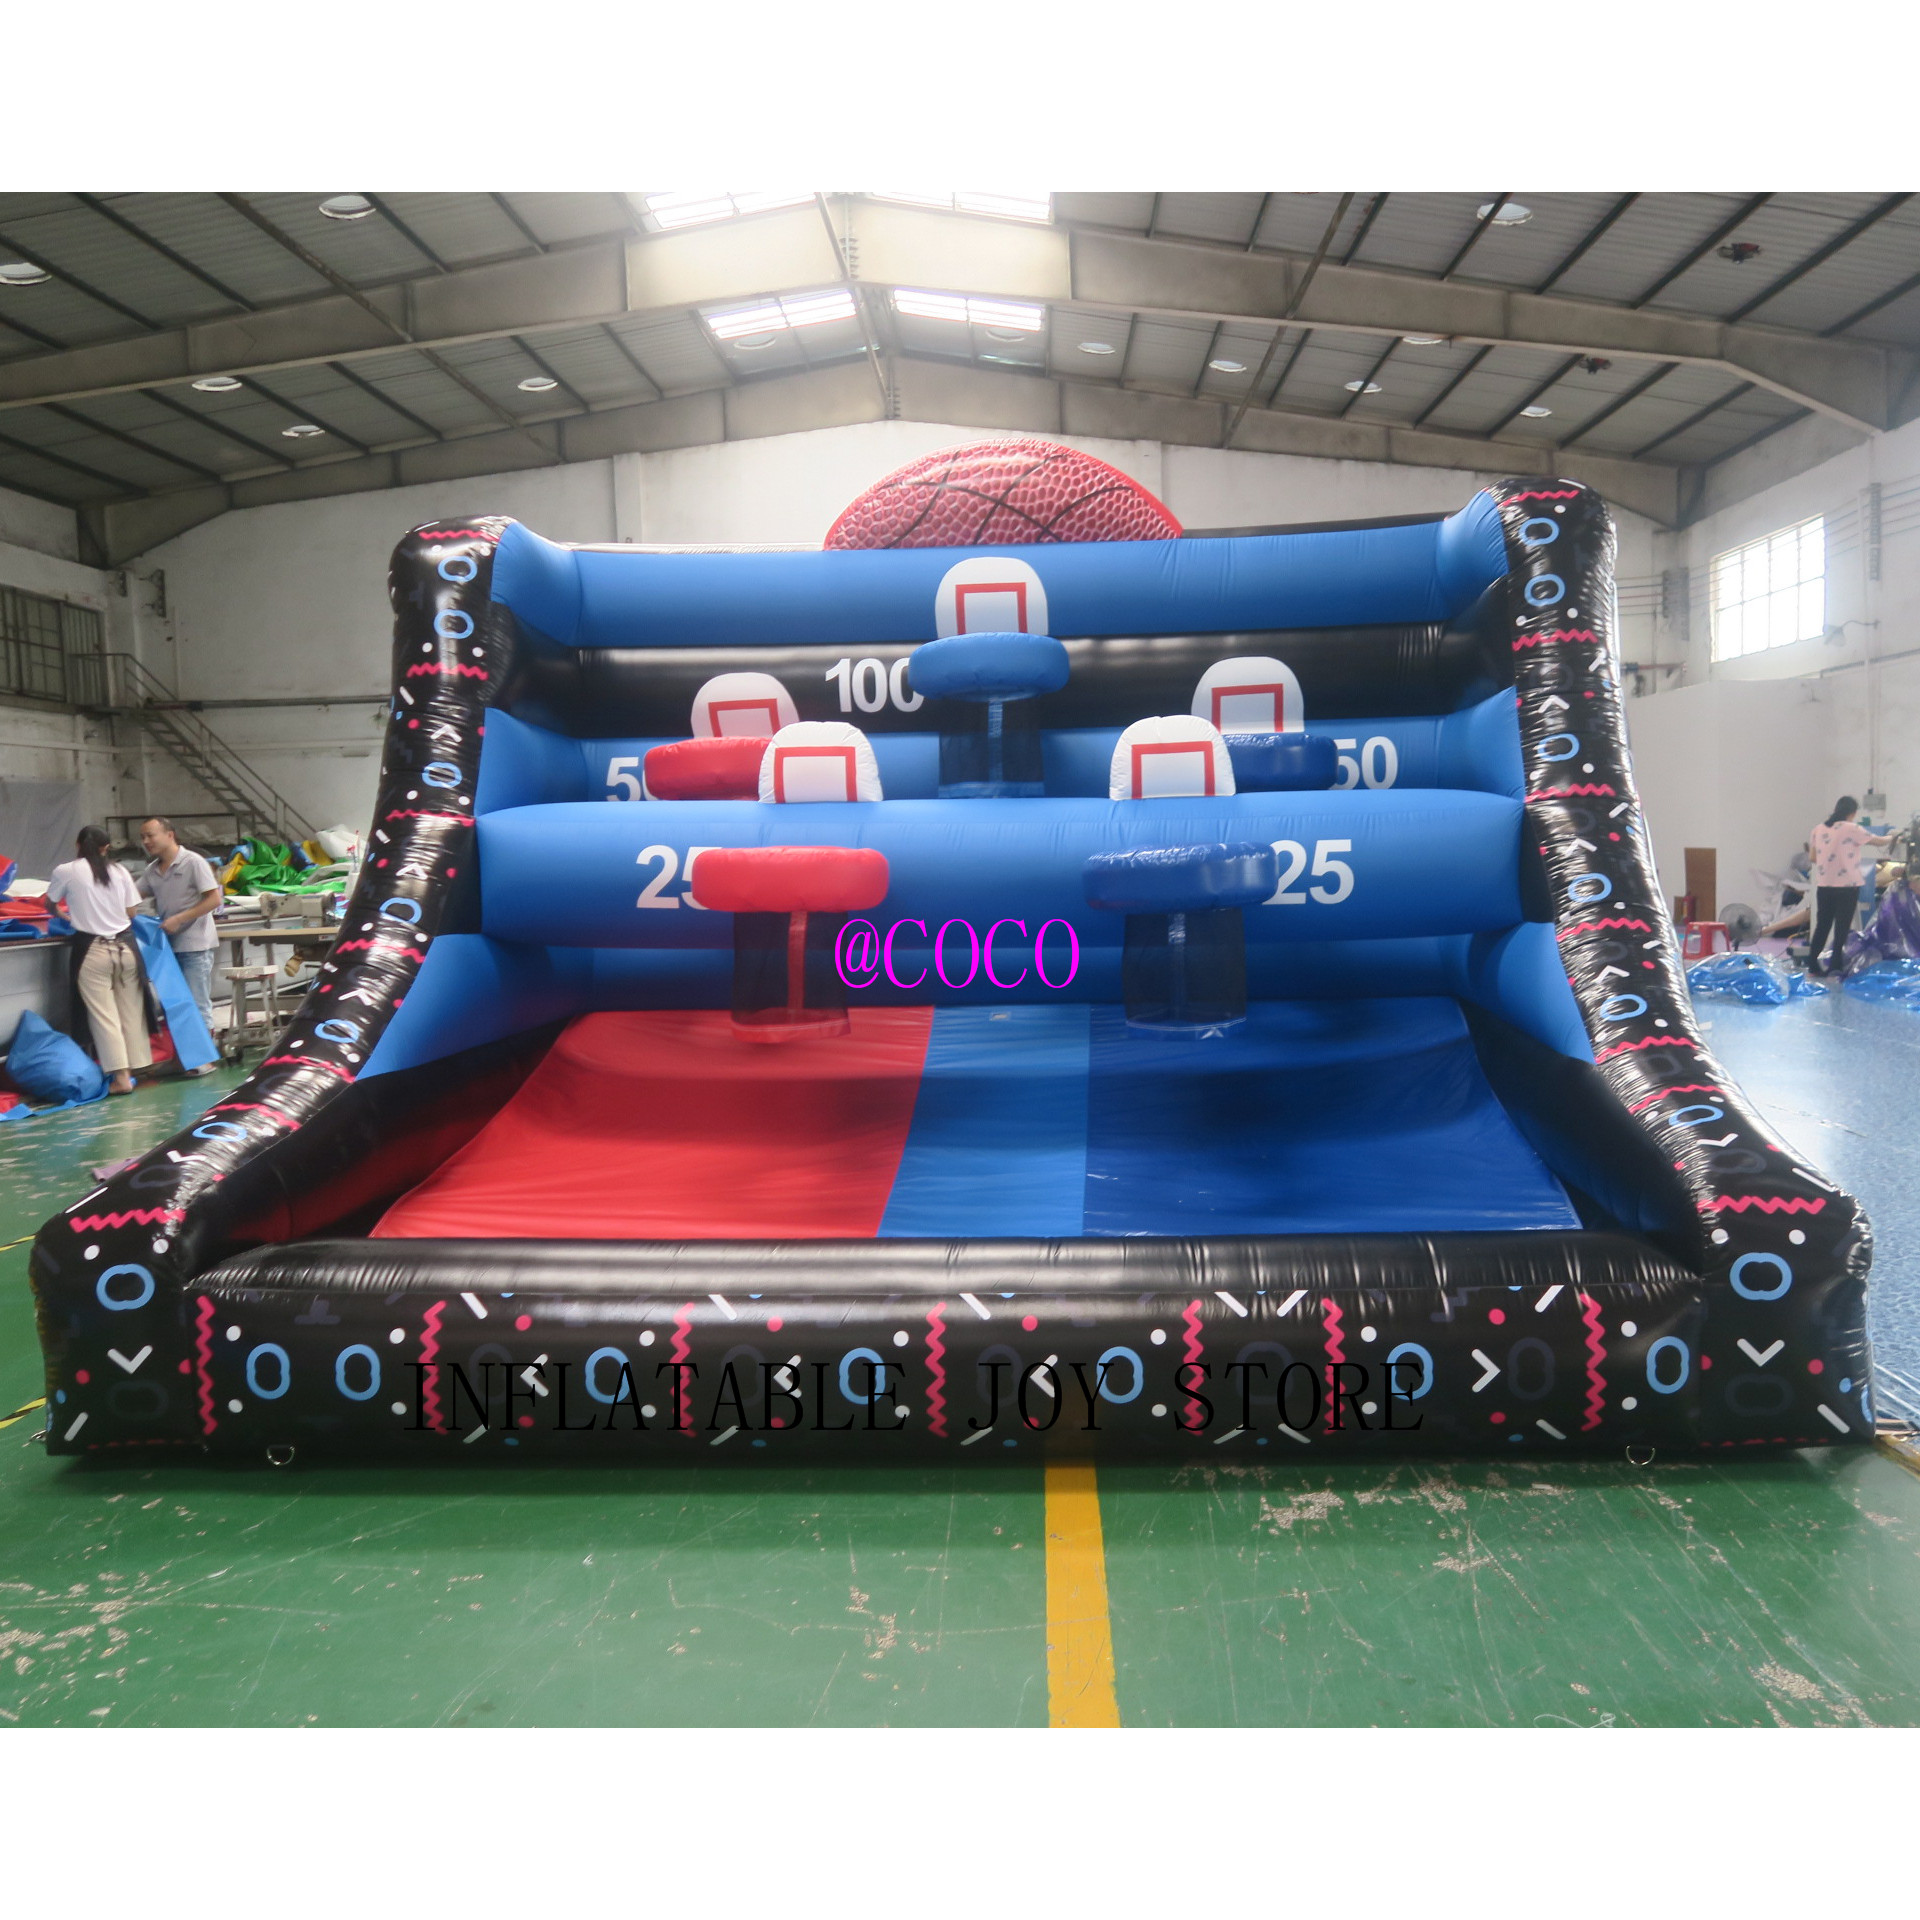 outdoor activities 4mWx3mLx3.5mH (13.2x10x11.5ft) with 6balls inflatable basketball hoop games Outdoor tossing sport game for kids and adults